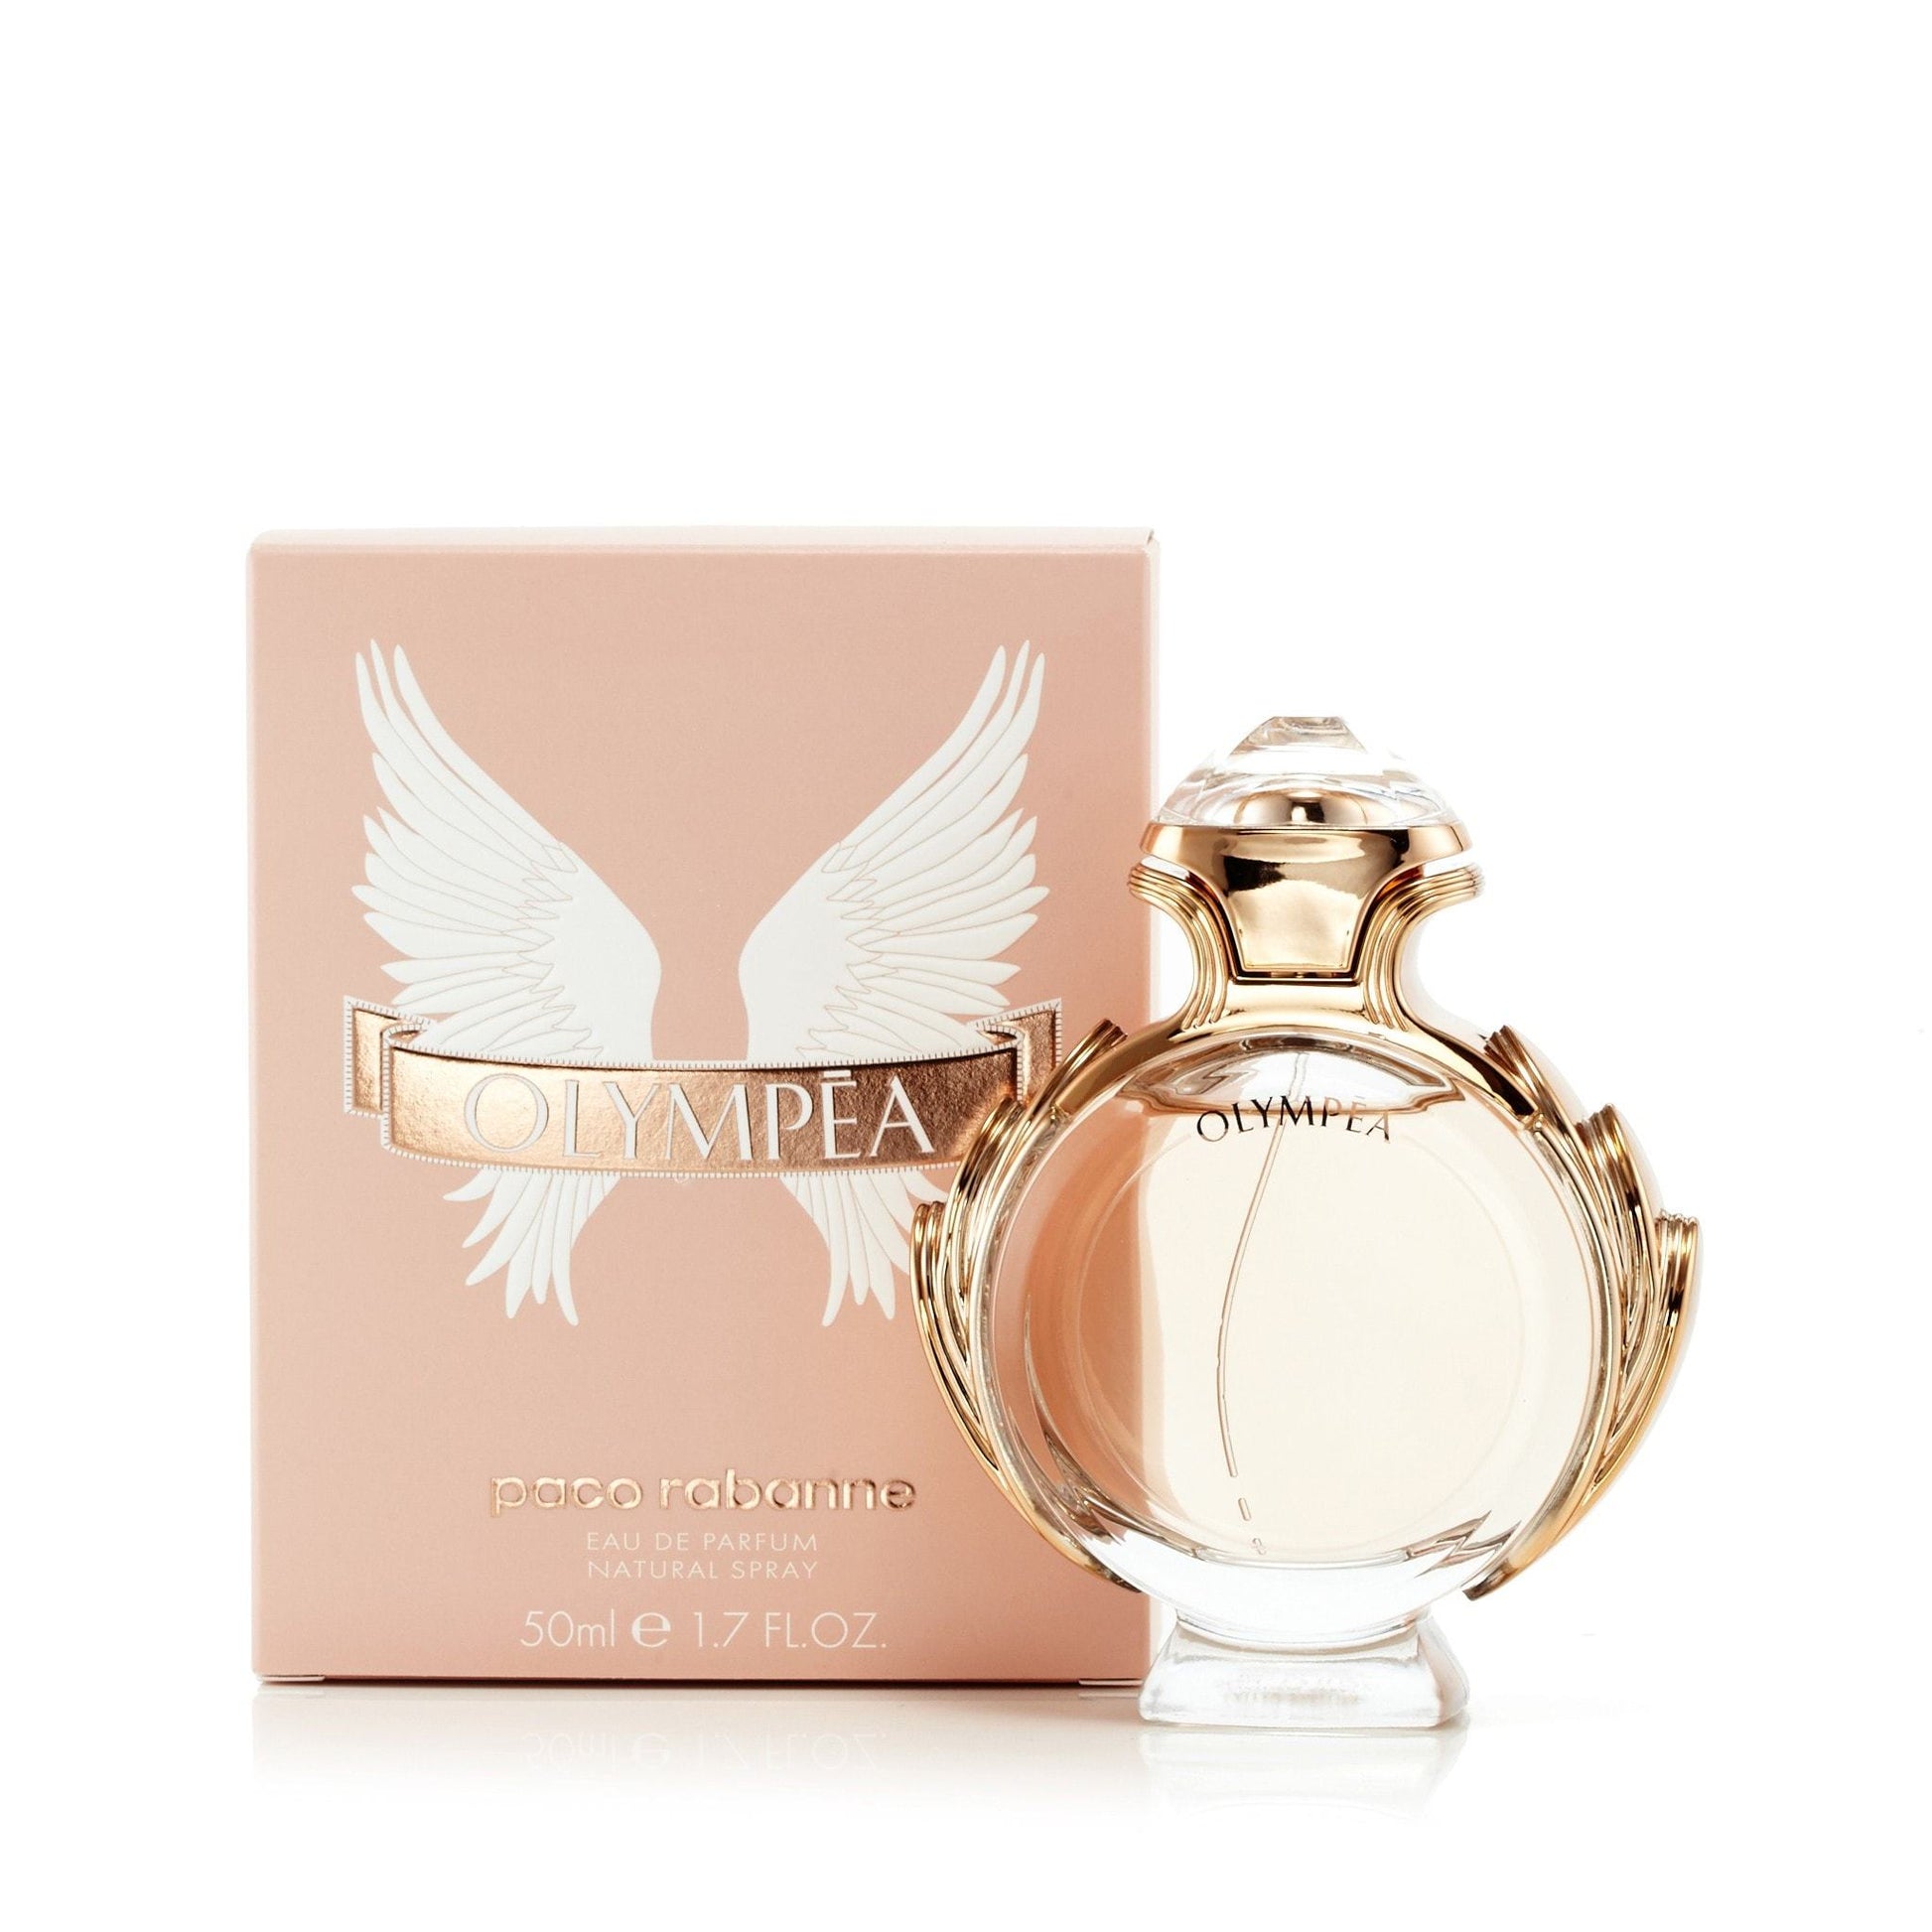 Olympea Eau de Parfum Spray for Women by Paco Rabanne, Product image 3